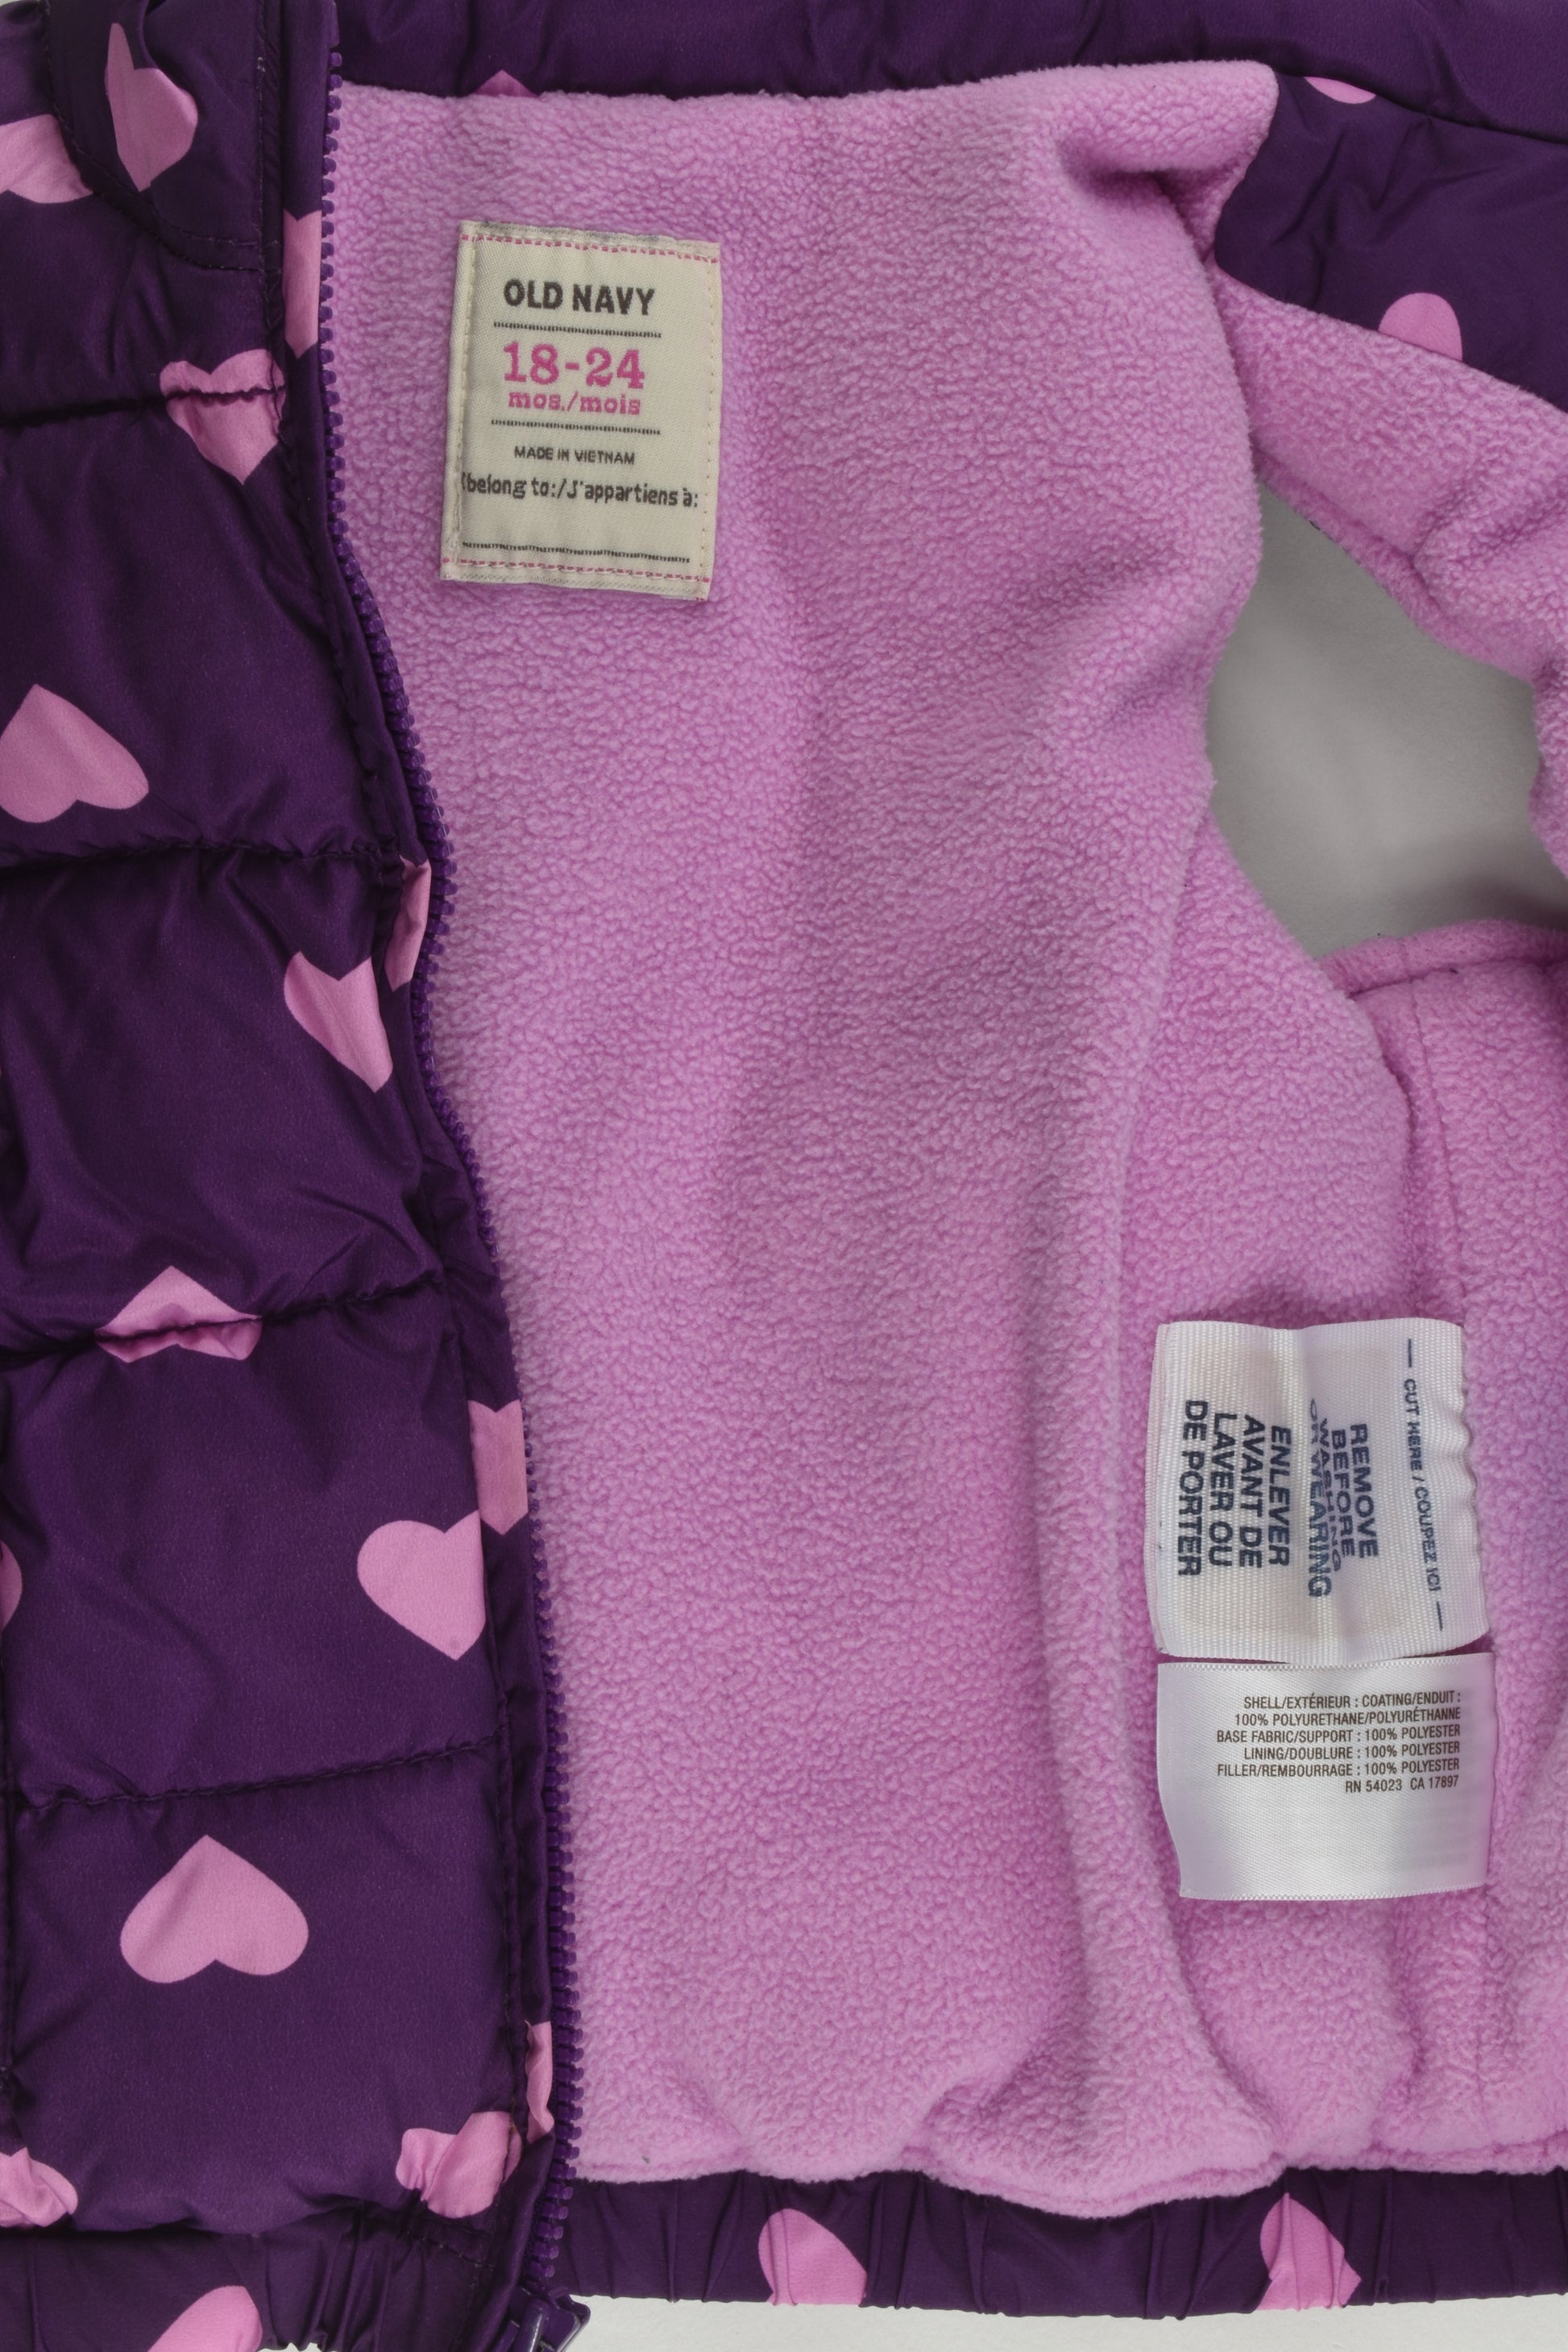 Old Navy Size 1-2 (18-24 months) Fleece Lined Love Hearts Puffer Vest